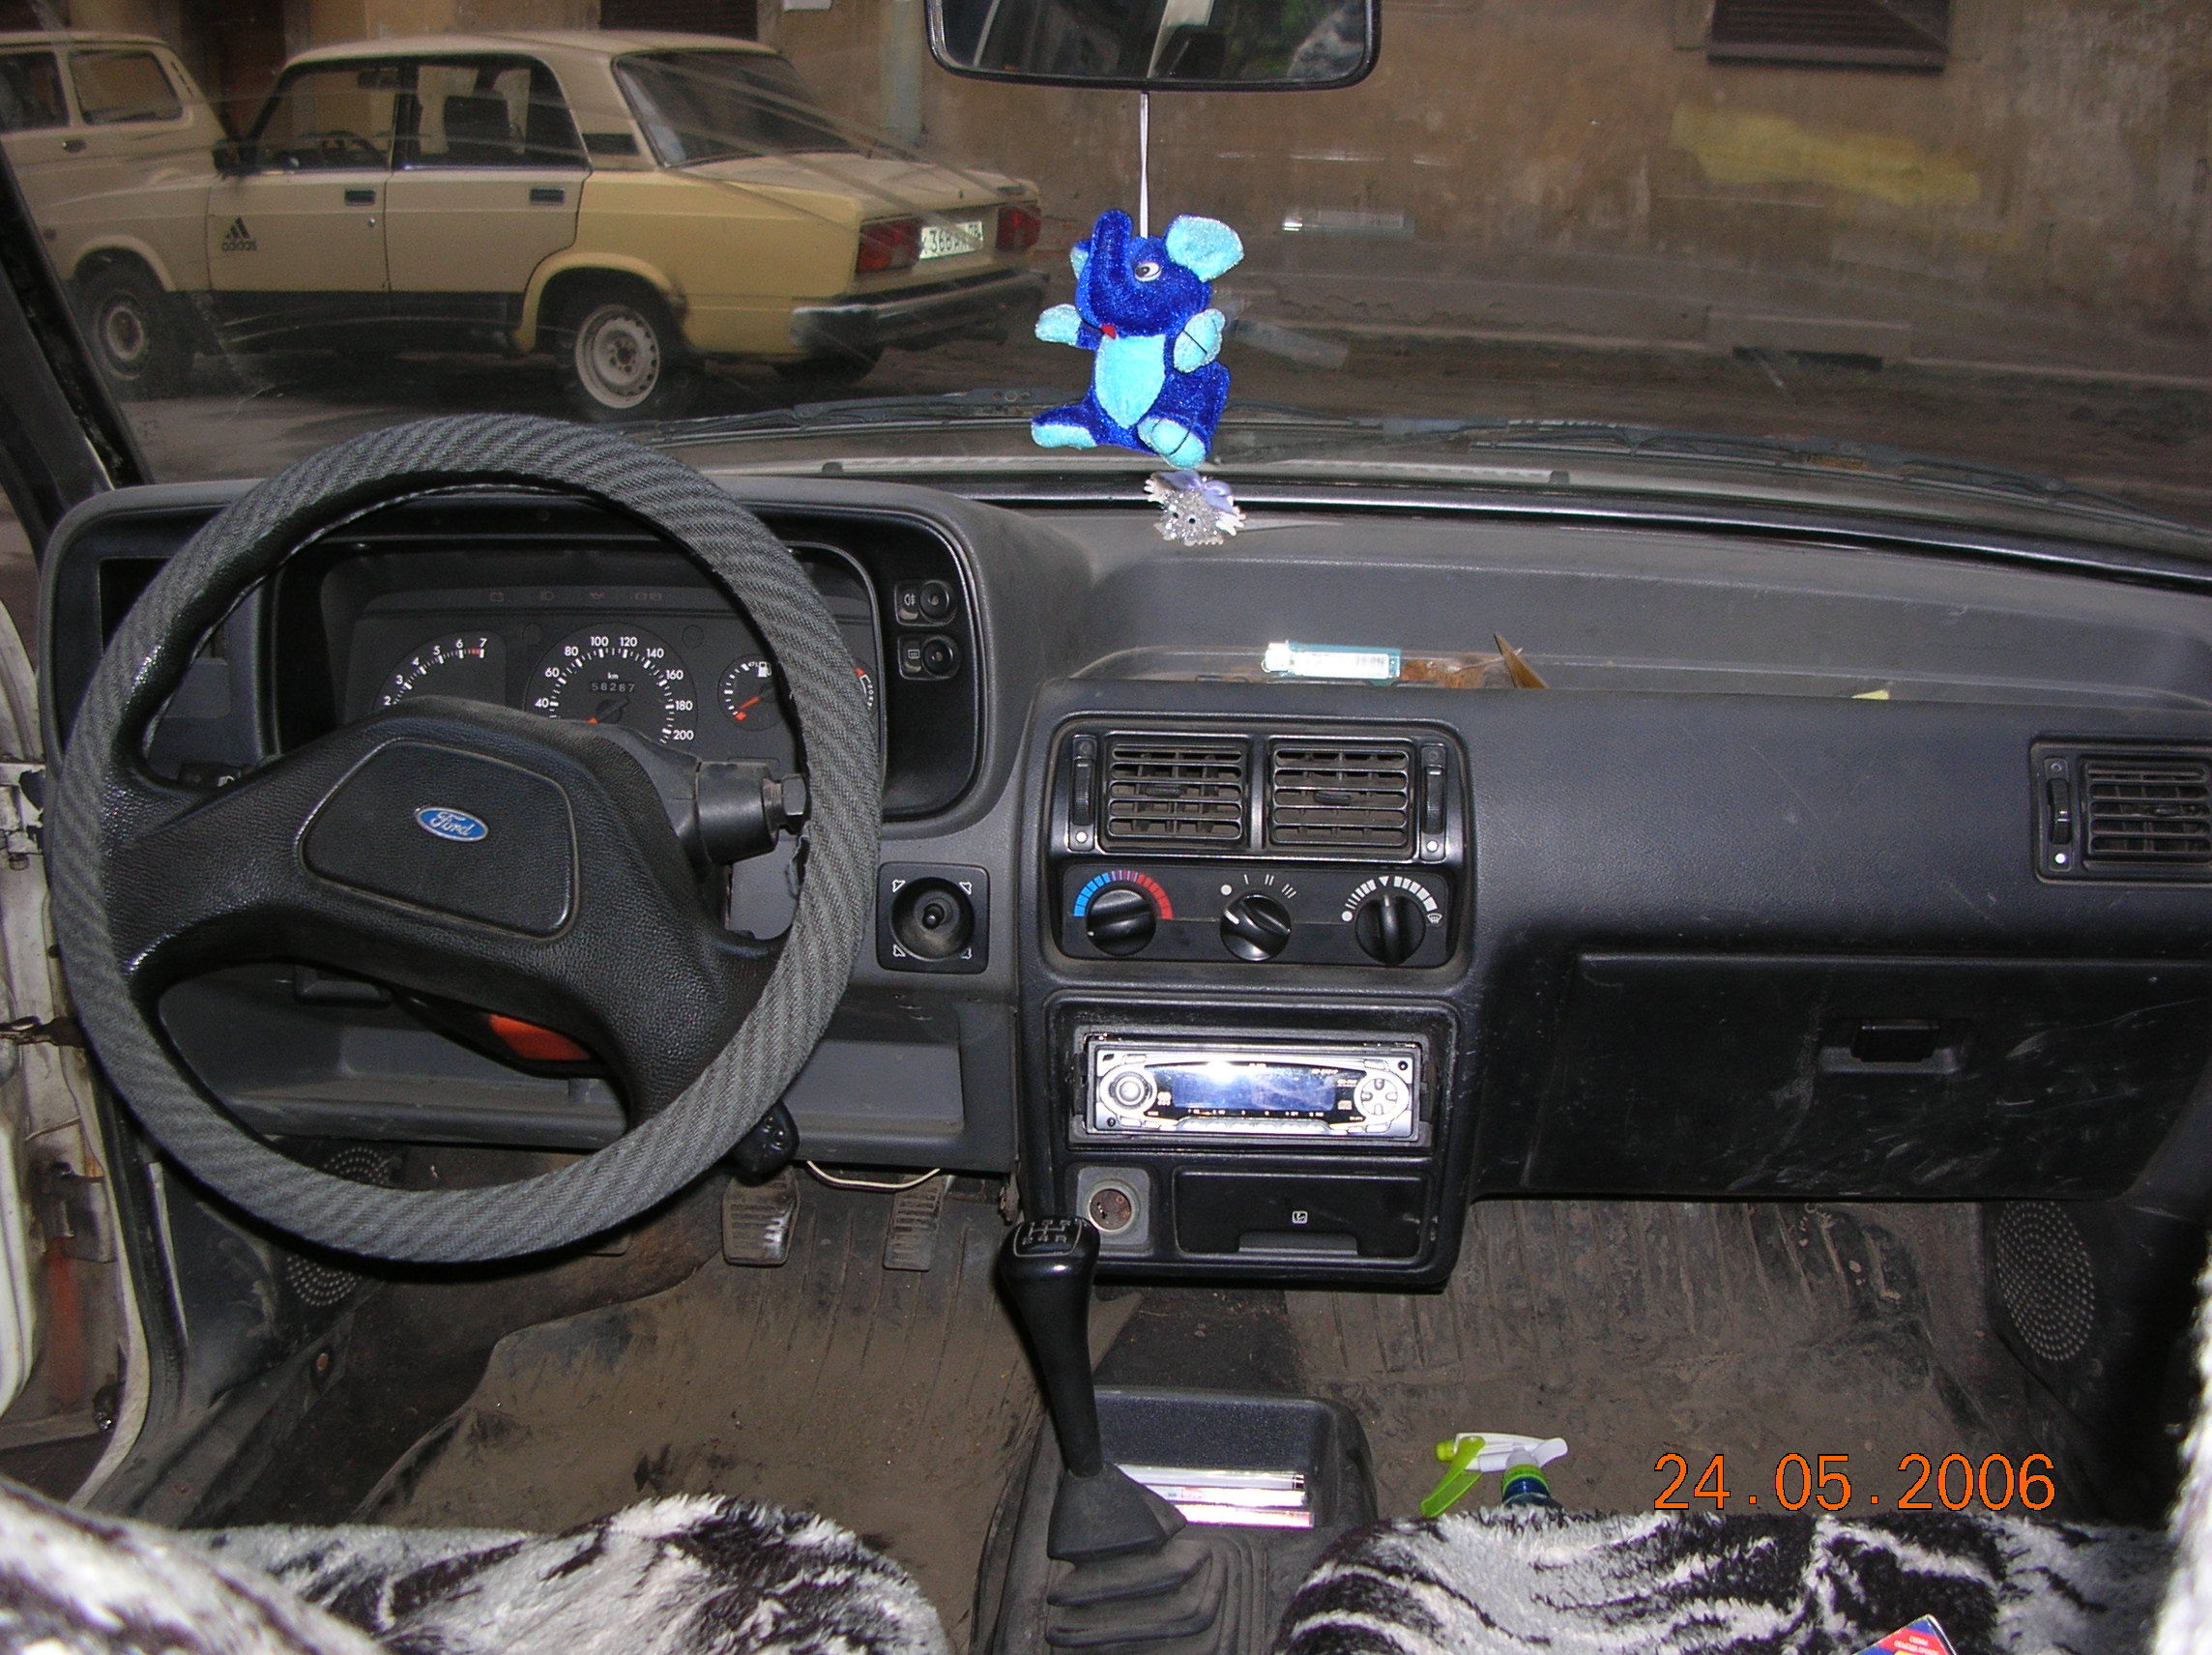 1988 Ford Orion